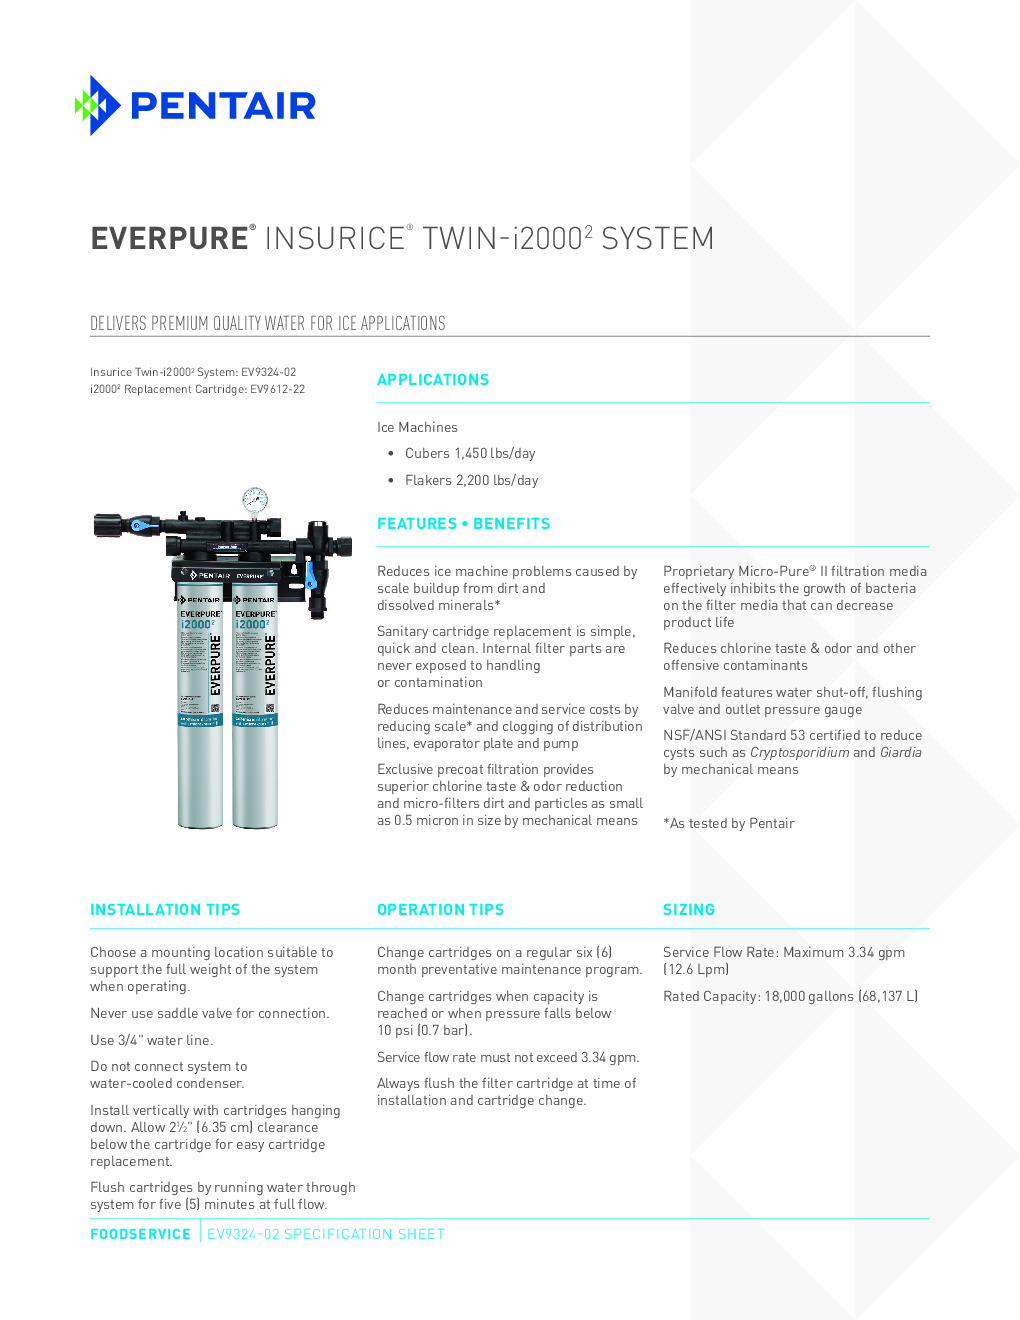 Everpure EV932402 for Ice Machines Water Filtration System - Open box